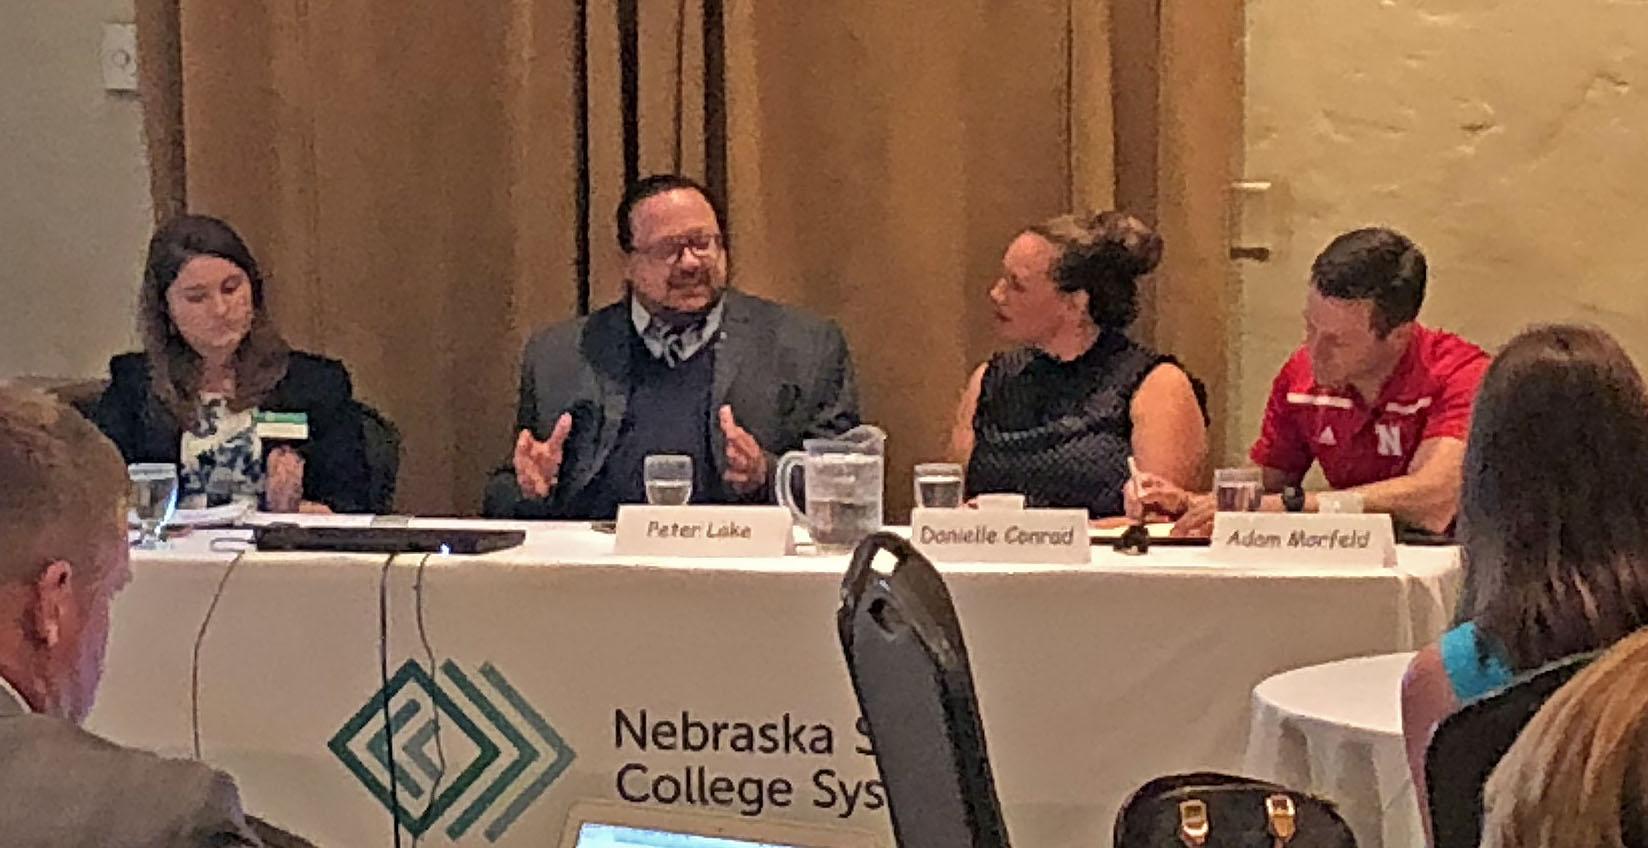 Taylor Sinclair, NSCS System Director for Title IX; Professor Peter Lake; Danielle Conrad, Director of Nebraska ACLU; and Senator Adam Morfeld answer questions during the panel discussion.